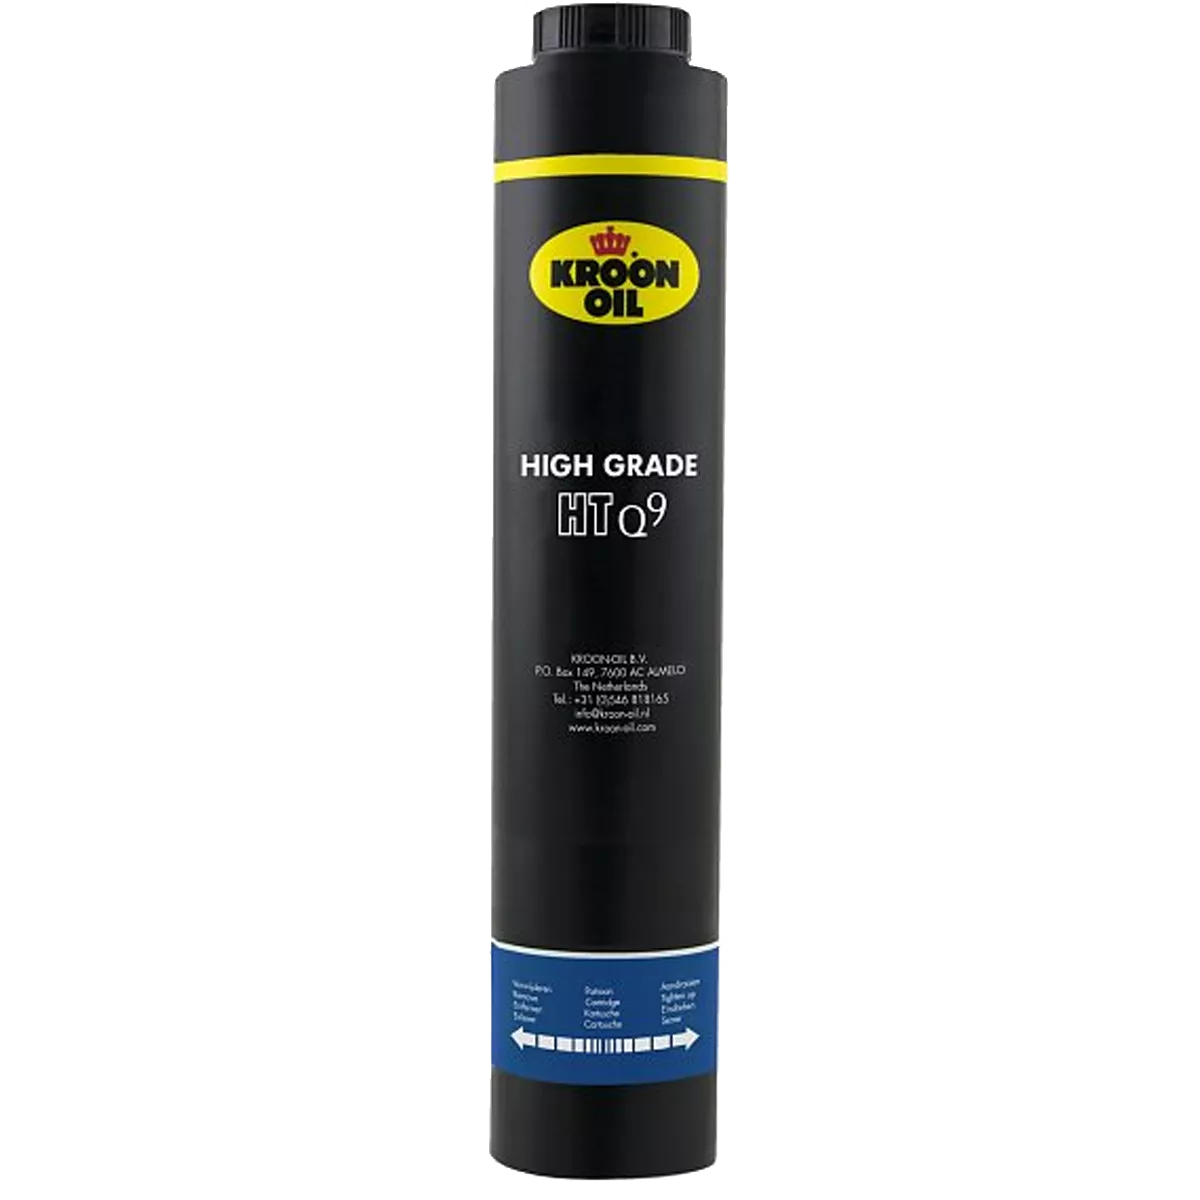 33389 KROON OIL Мастило HIGH GRADE GREASE HT Q9 400г